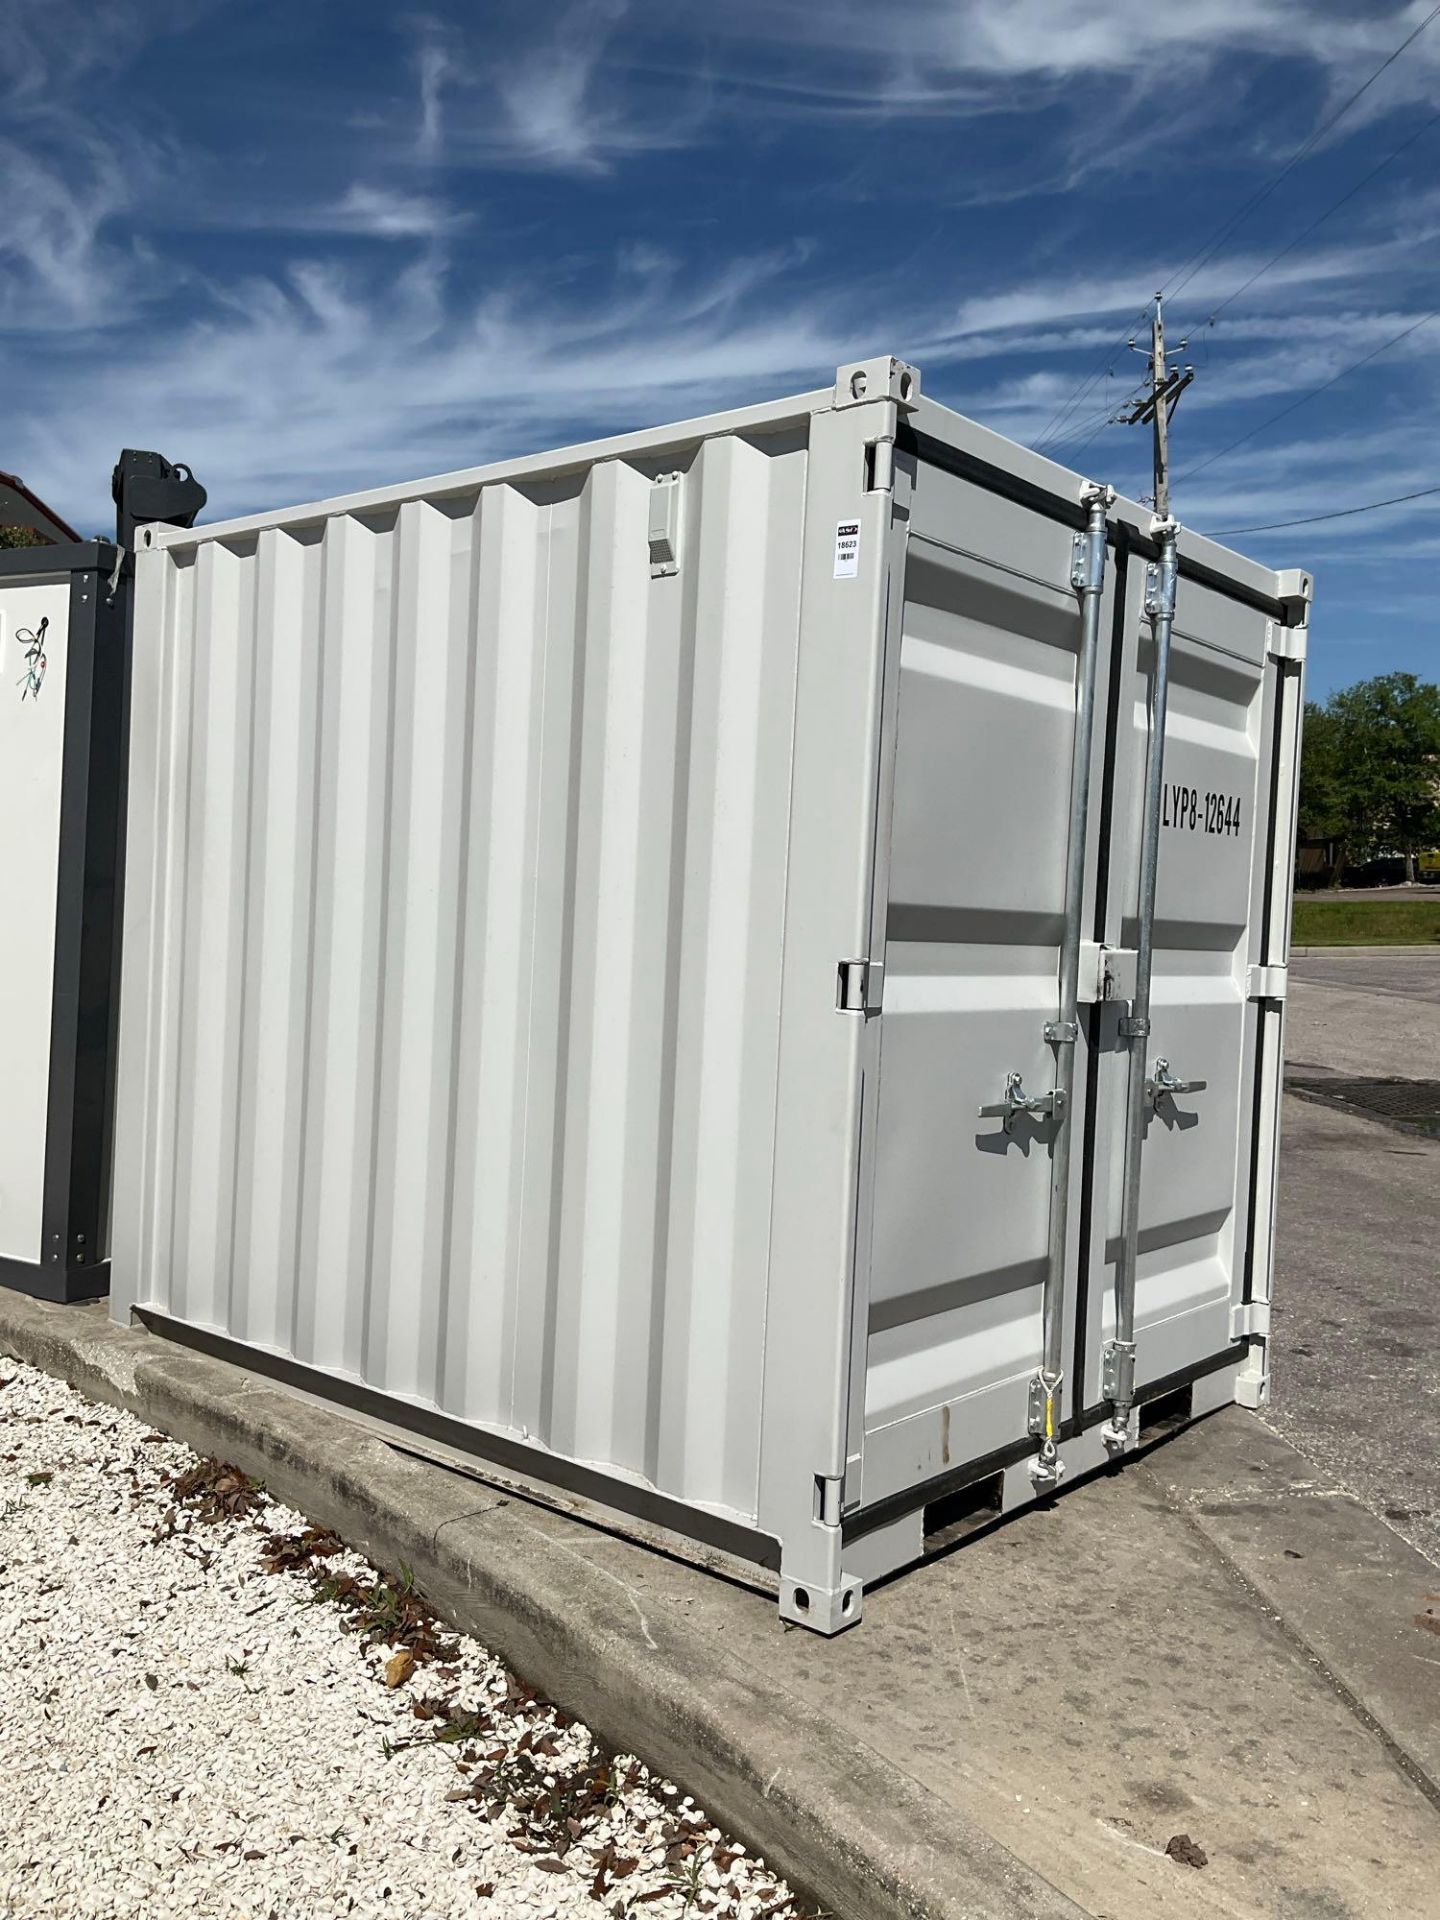 8' OFFICE / STORAGE CONTAINER, FORK POCKETS WITH SIDE DOOR ENTRANCE & SIDE WINDOW, APPROX 86'' TALL - Image 4 of 7